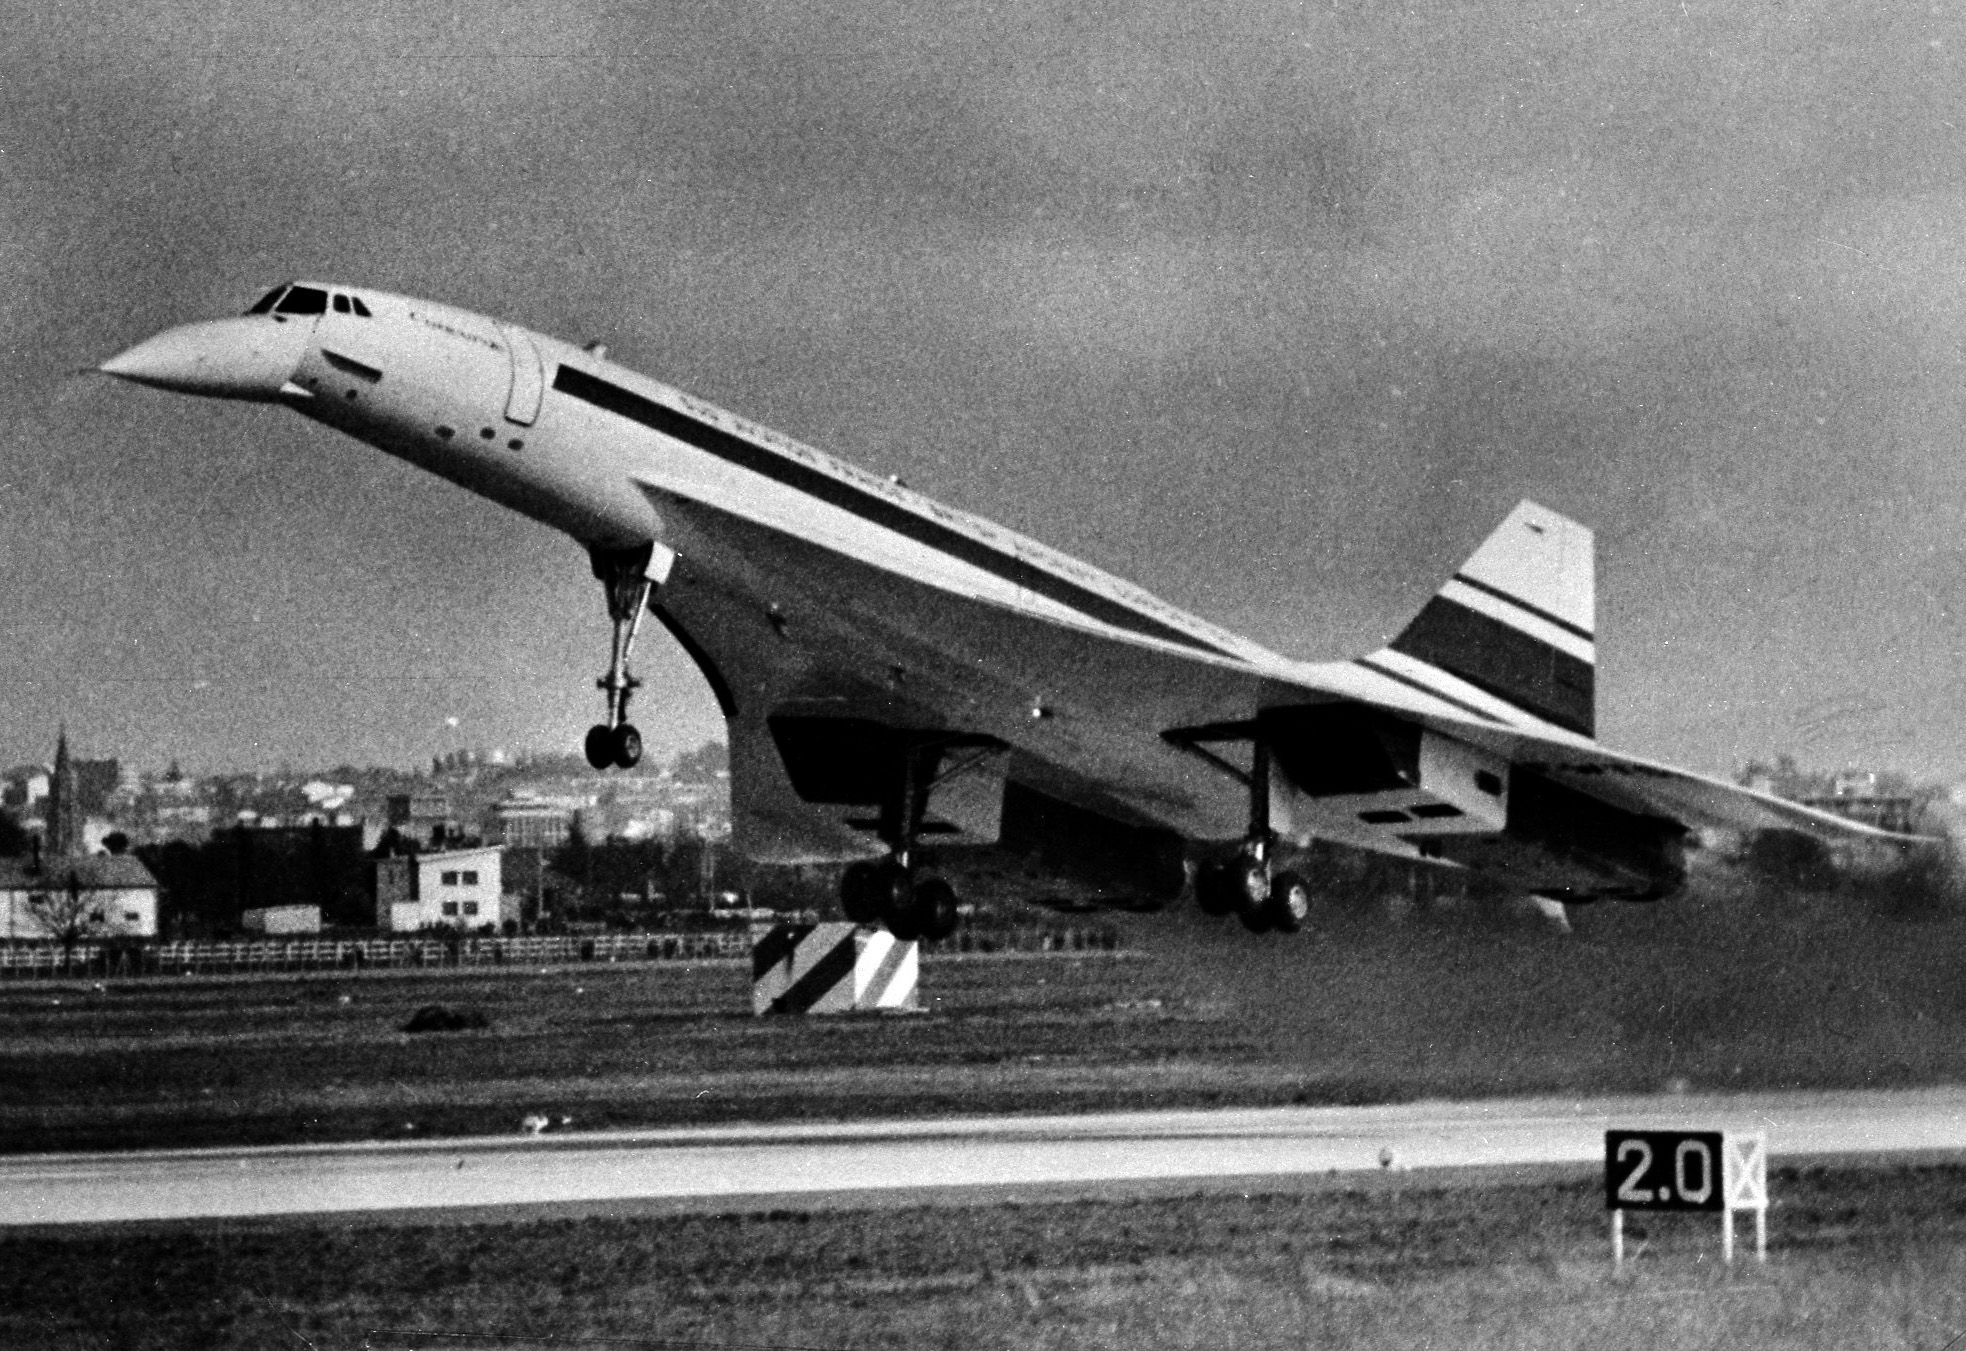 A photo of Concorde taking off for its first flight.